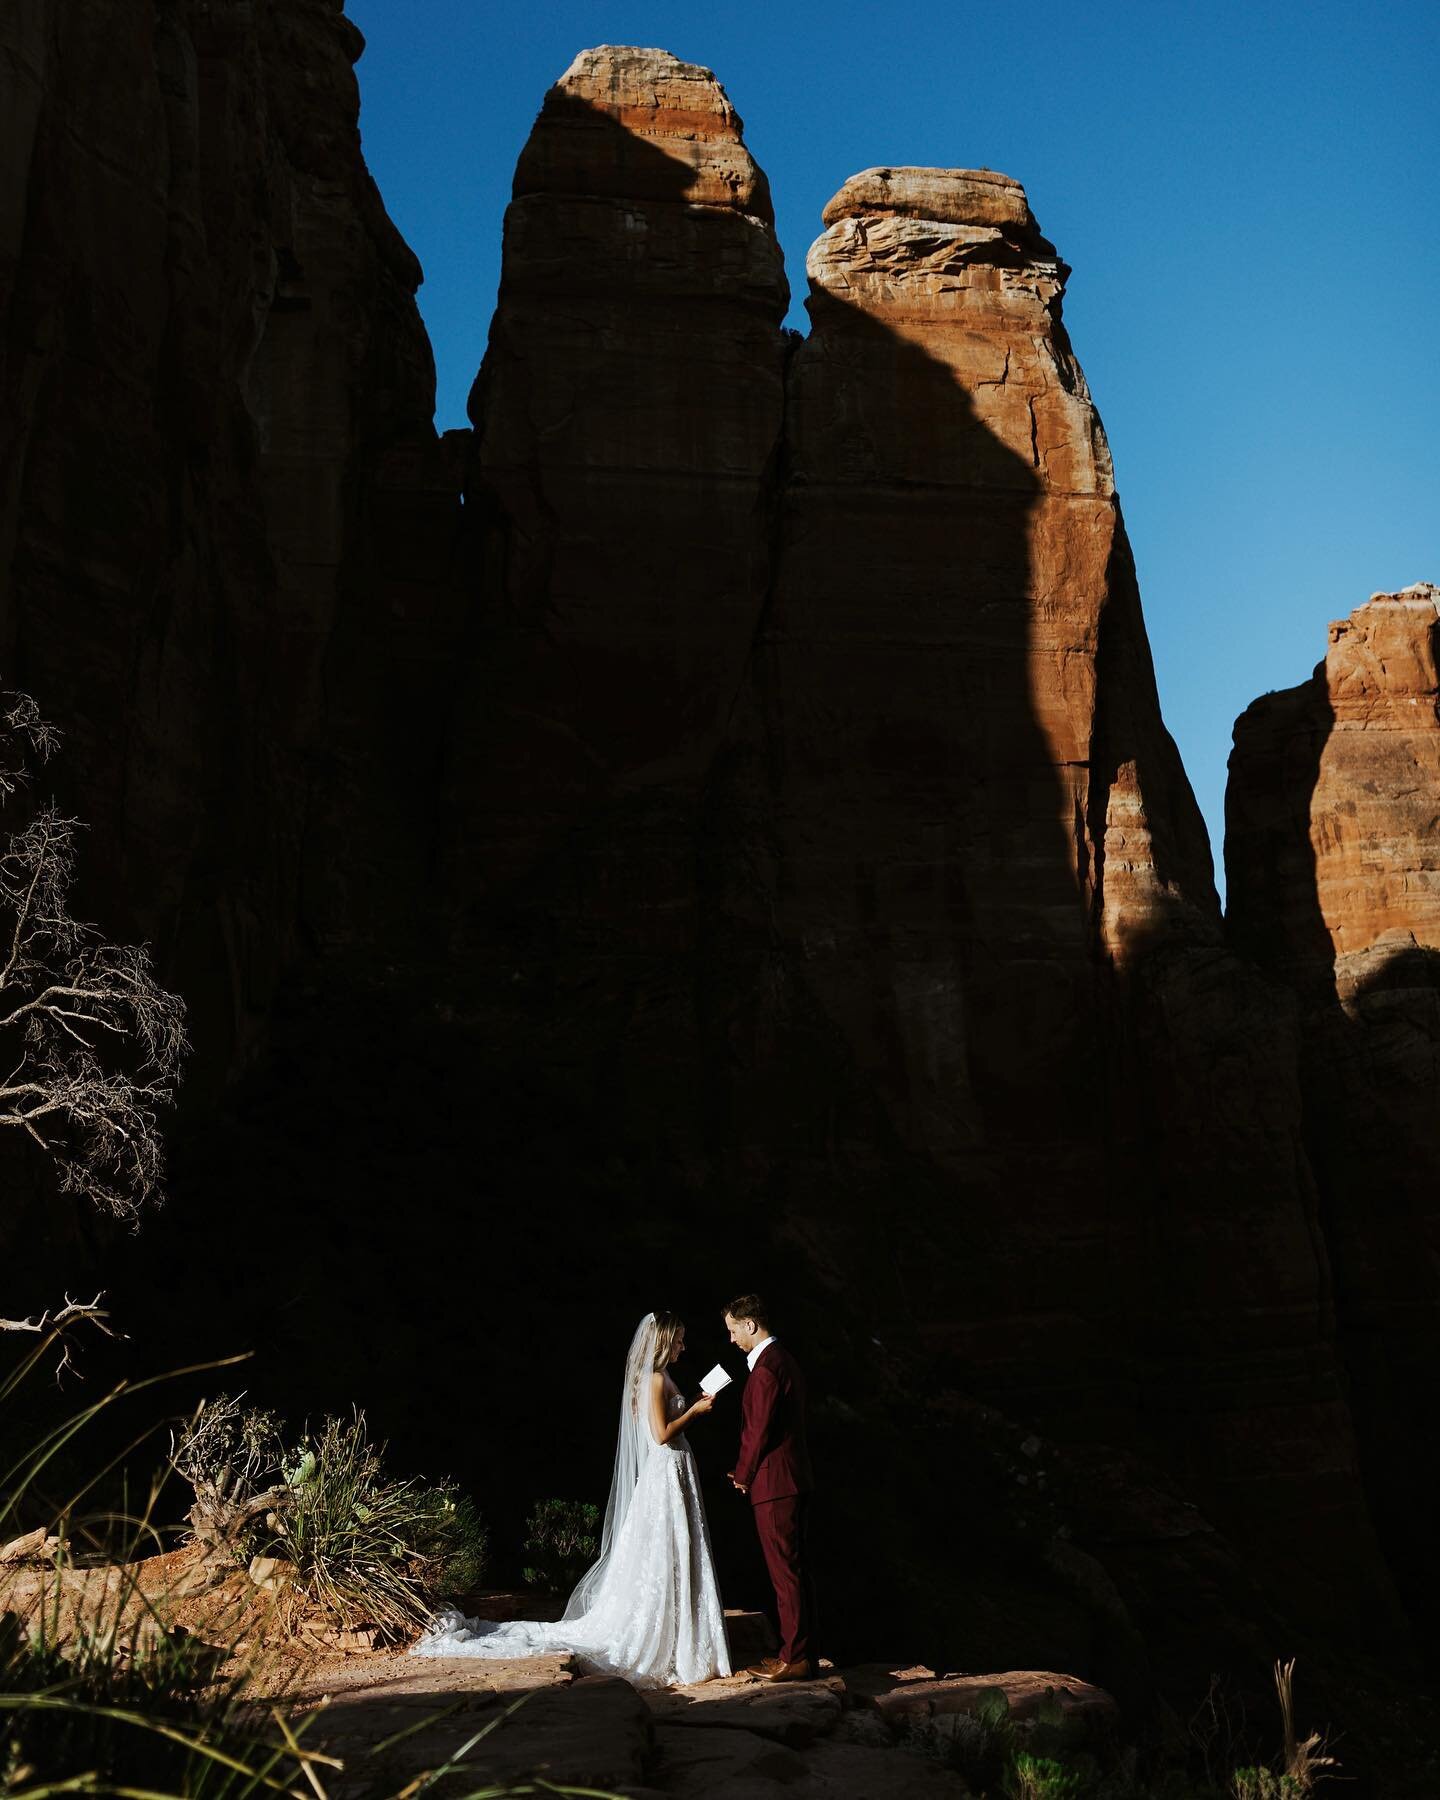 Last week were my last two elopements for the spring season! Starting off with these two- Lauren &amp; Michael had a magical day in Sedona starting off with an epic sunrise hike to this spot and an afternoon ceremony with family and an intimate celeb